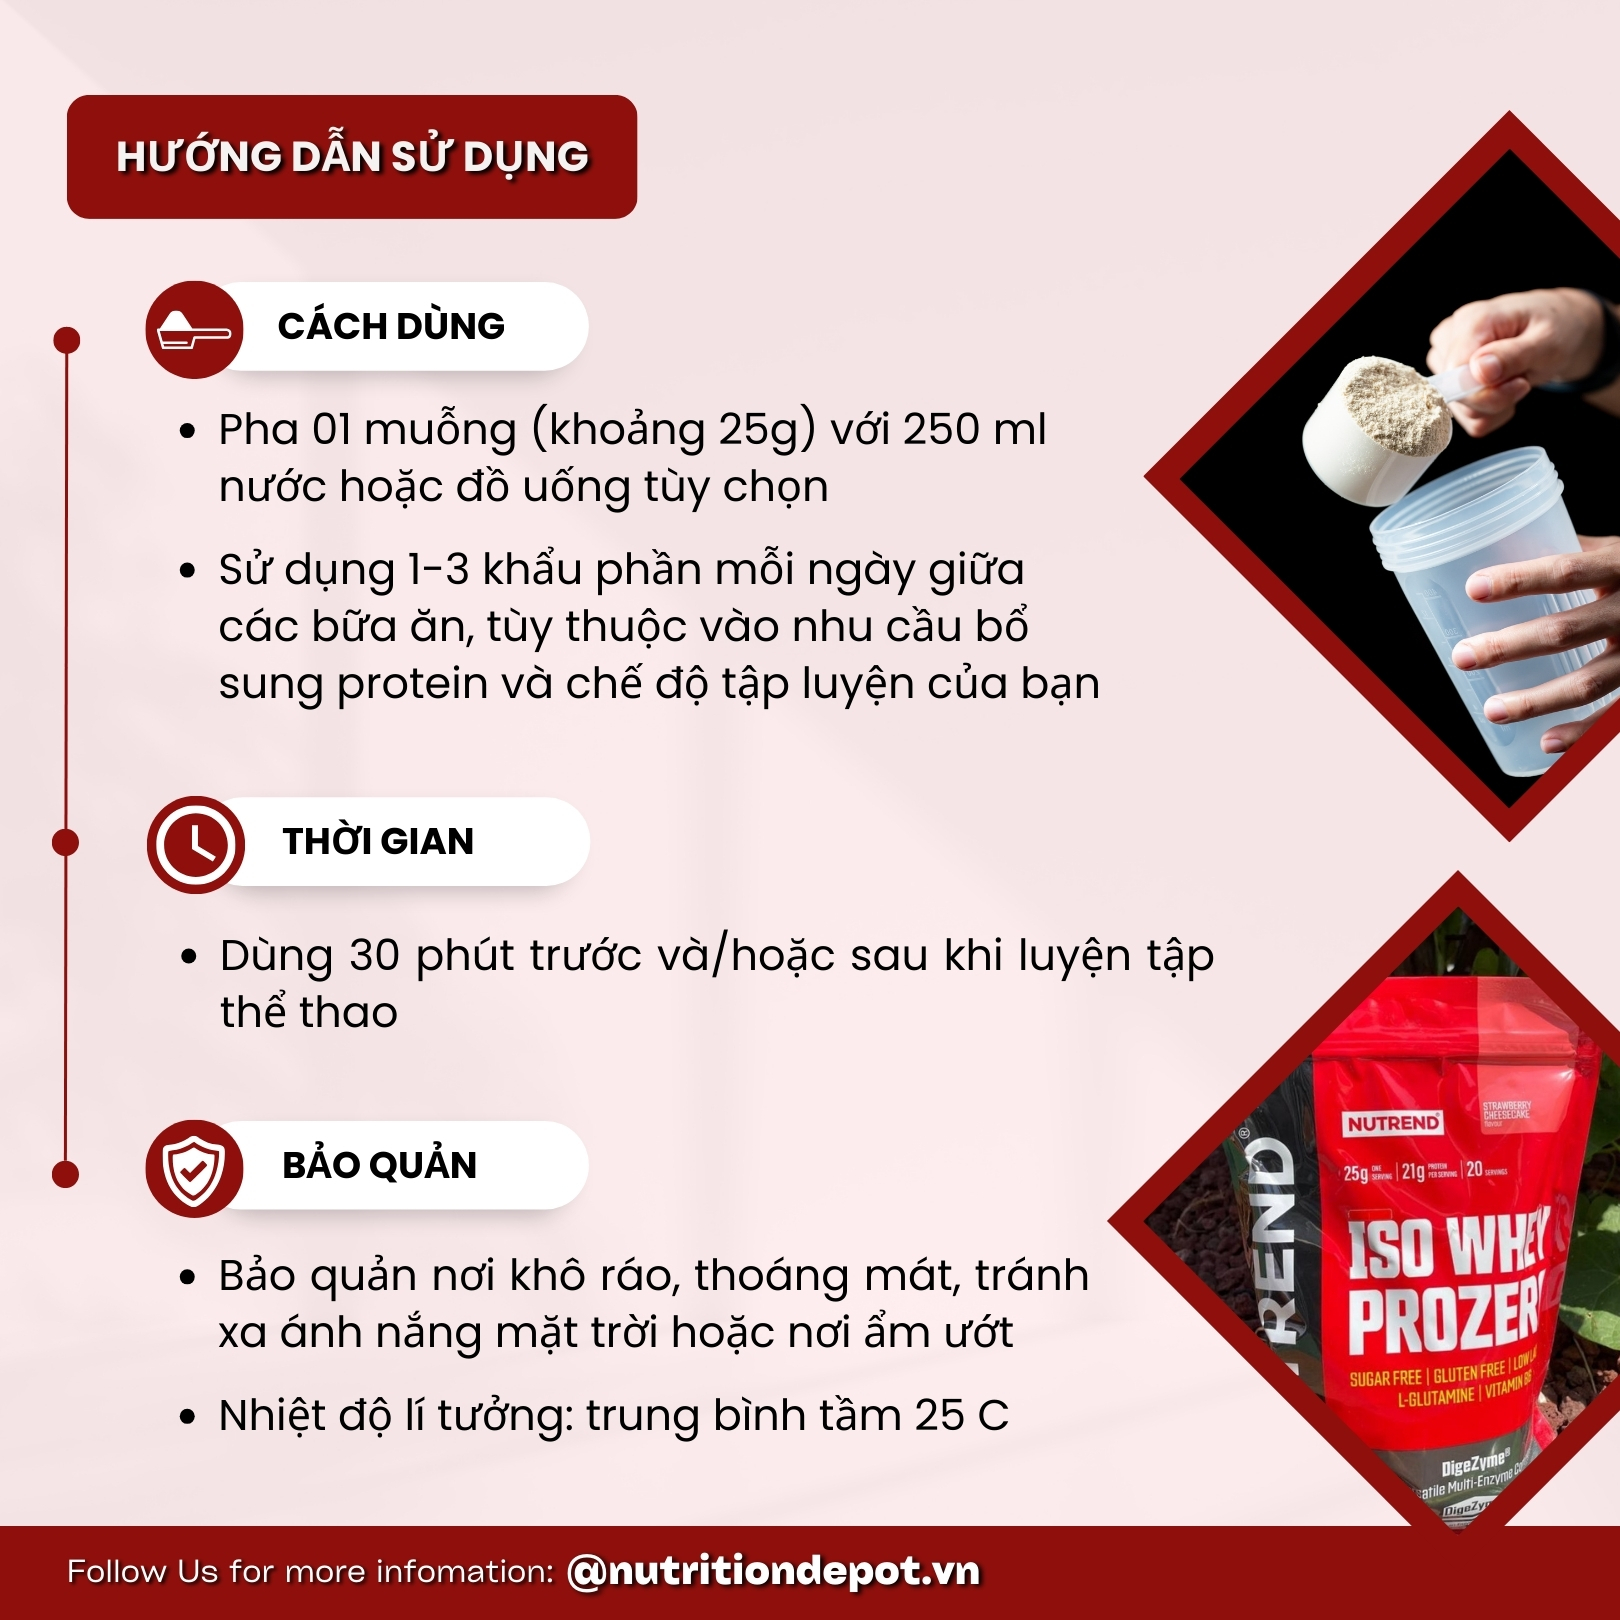 Whey Isolate cao cấp bổ sung đạm protein - Nutrend Whey Protein Isolate Iso Prozero (Túi 500g) - Nutrition Depot Vietnam